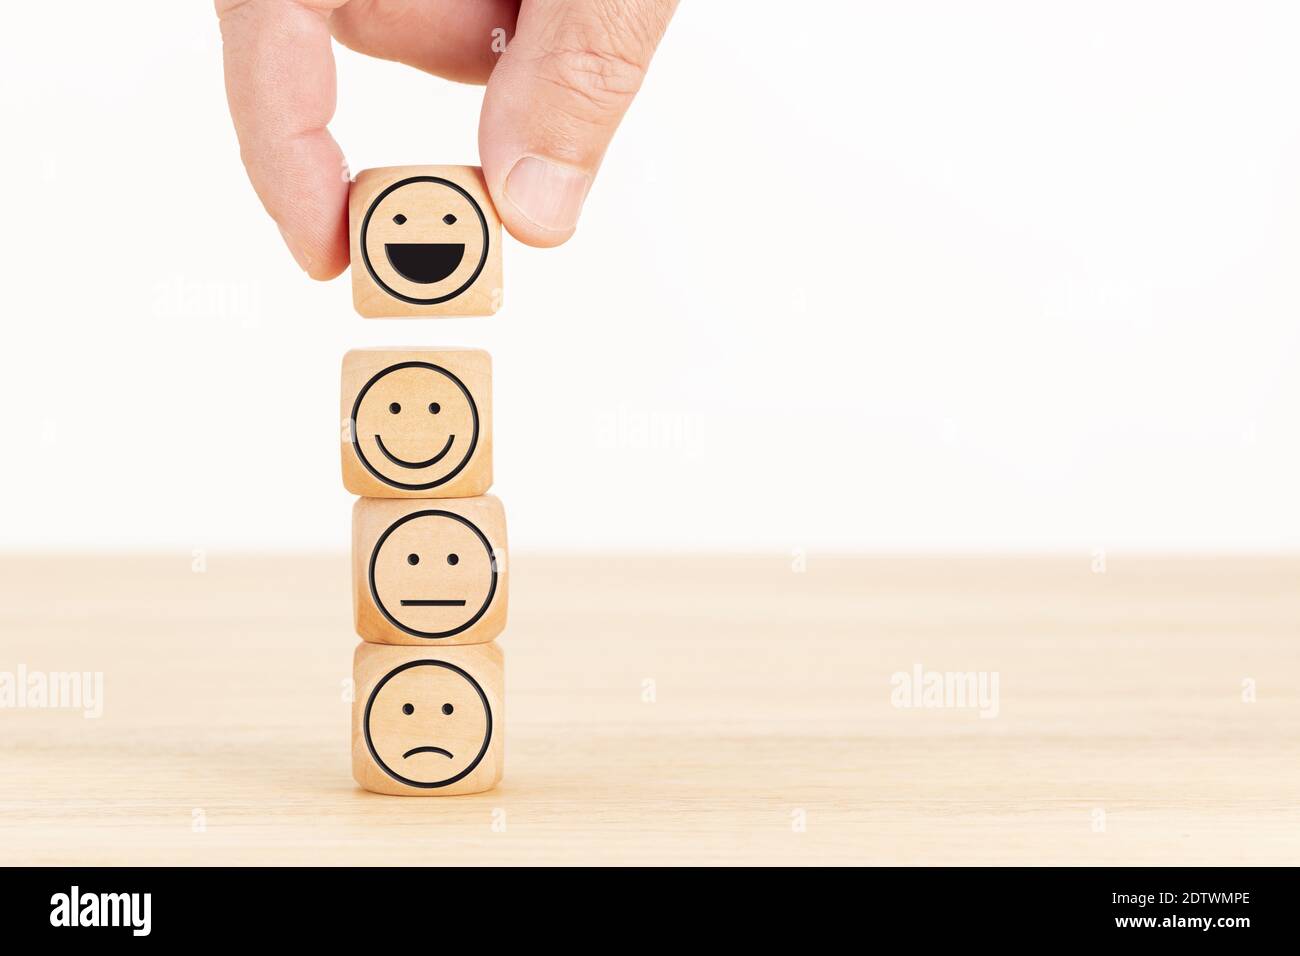 Customer service evaluation and satisfaction survey concept. Hand picked the happy face emoticon on wooden blocks. Copy space Stock Photo